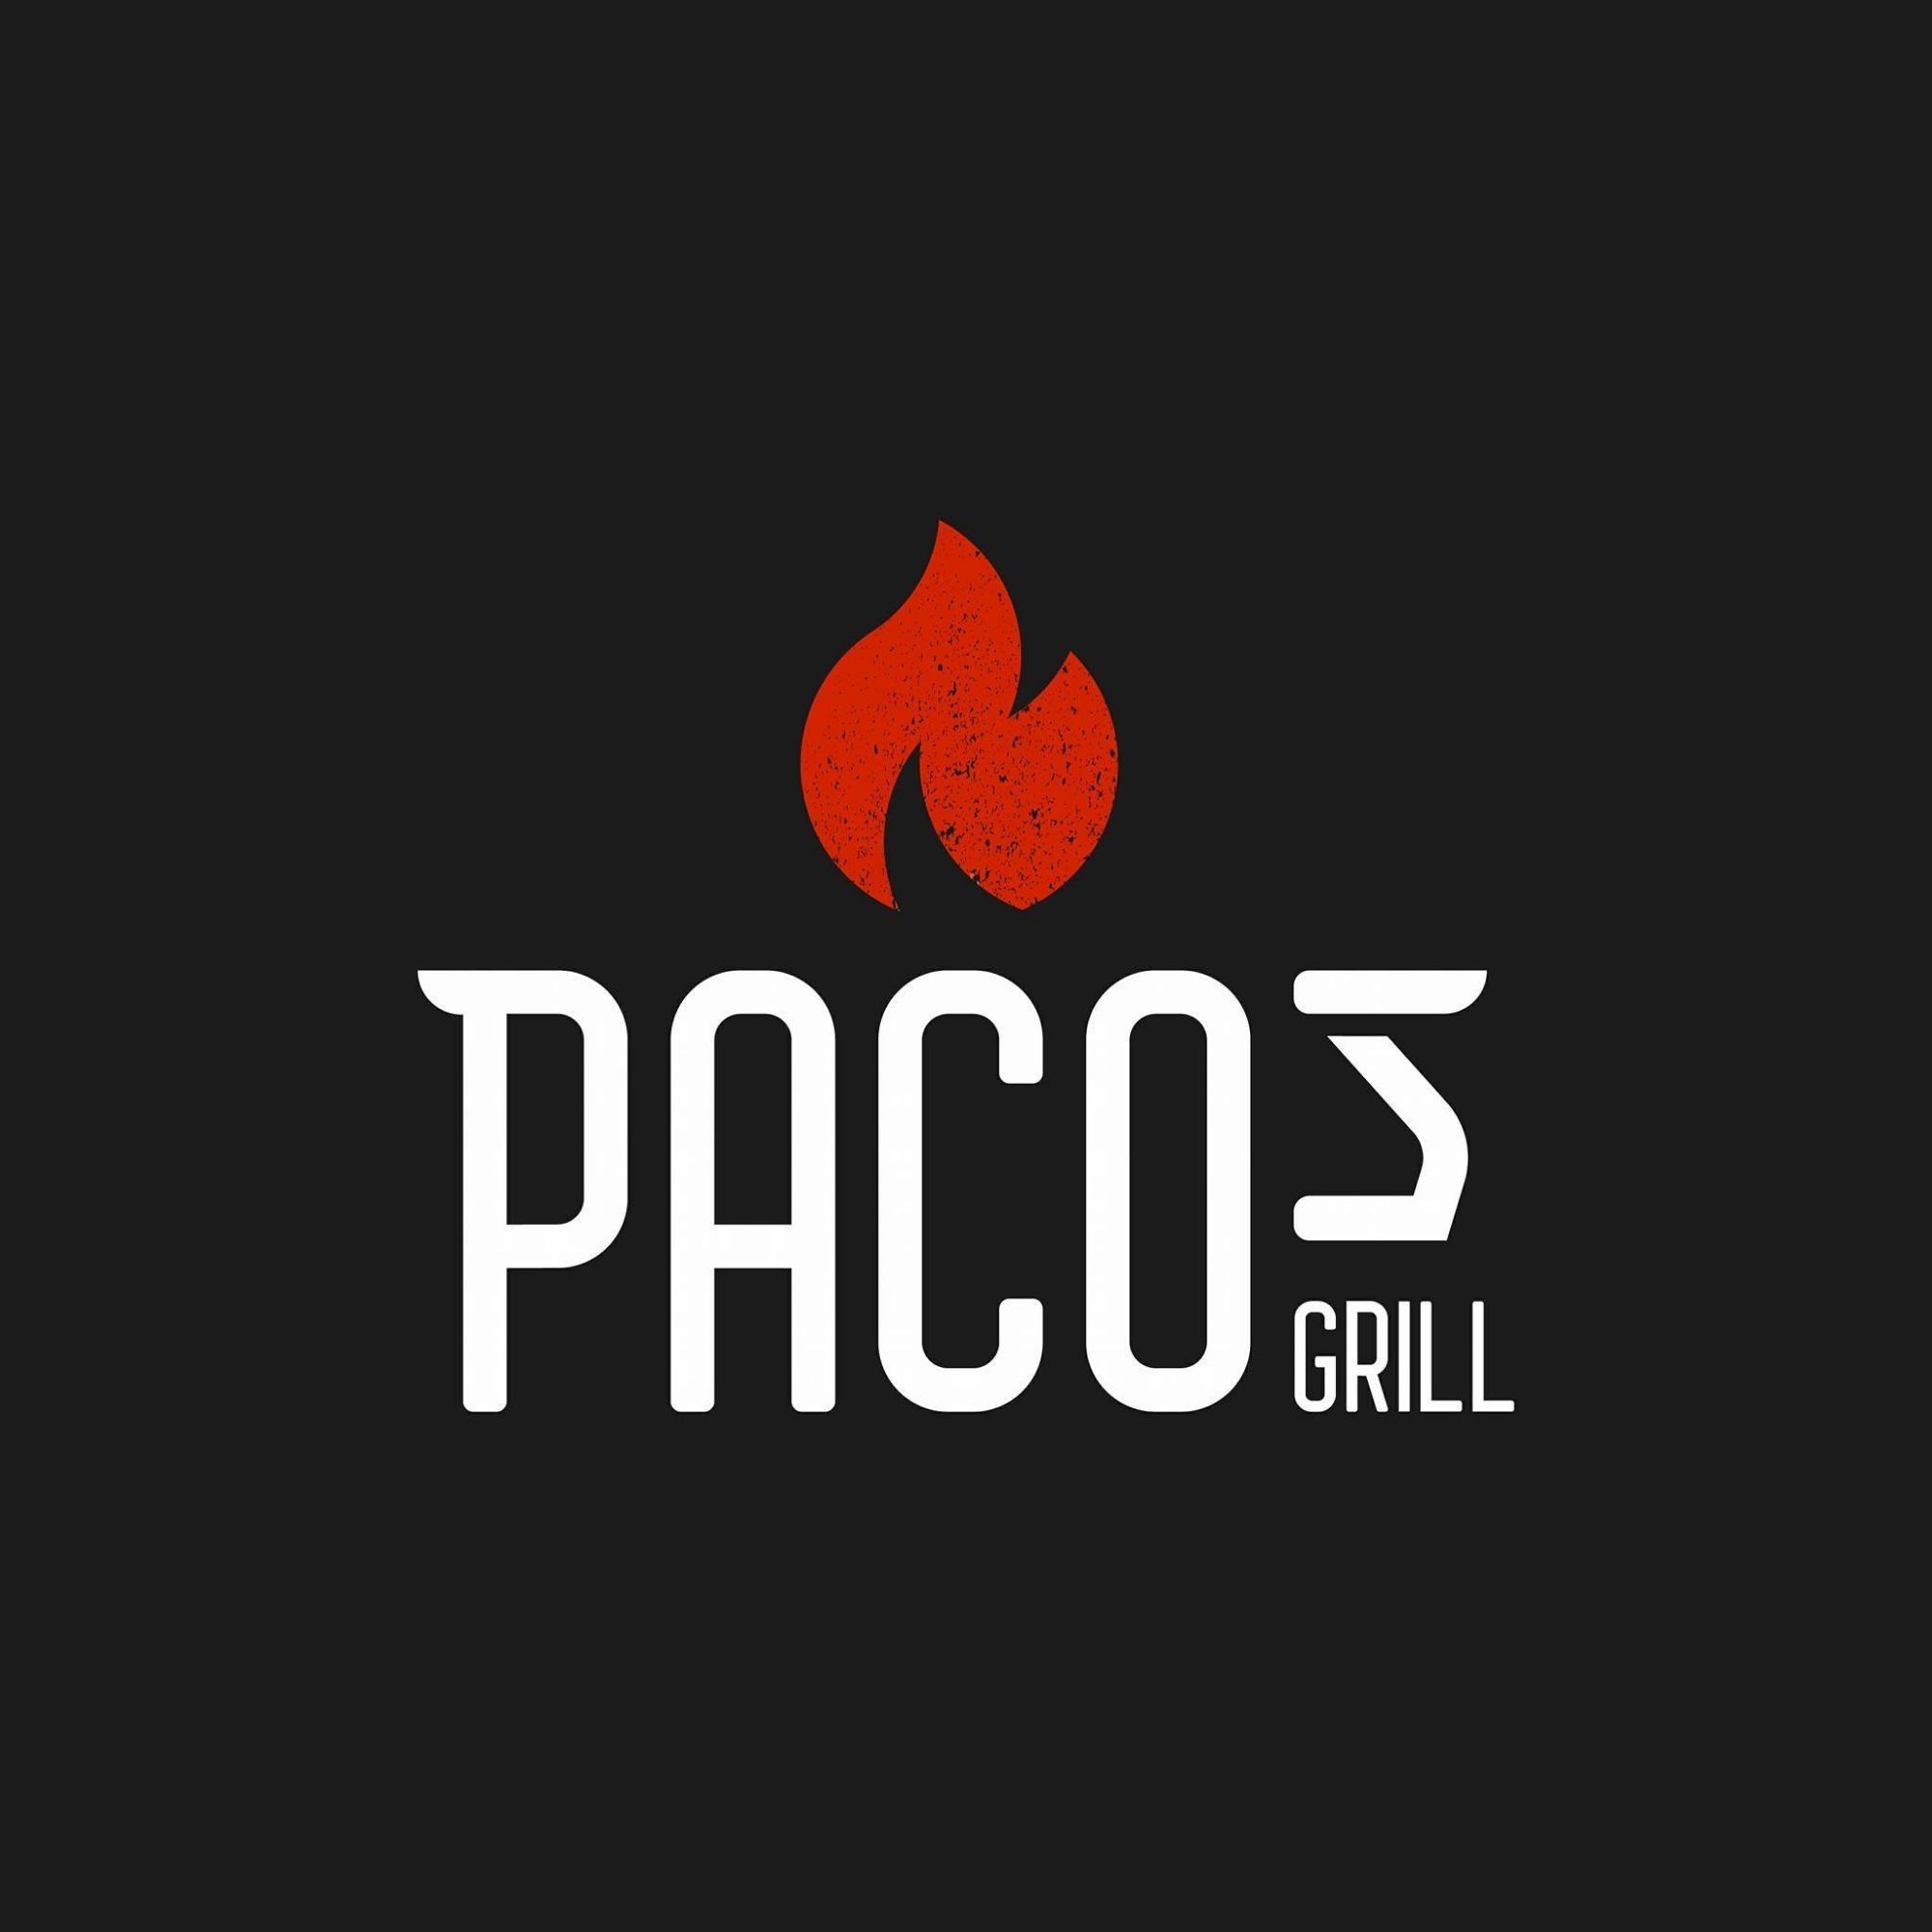 Paco's grill